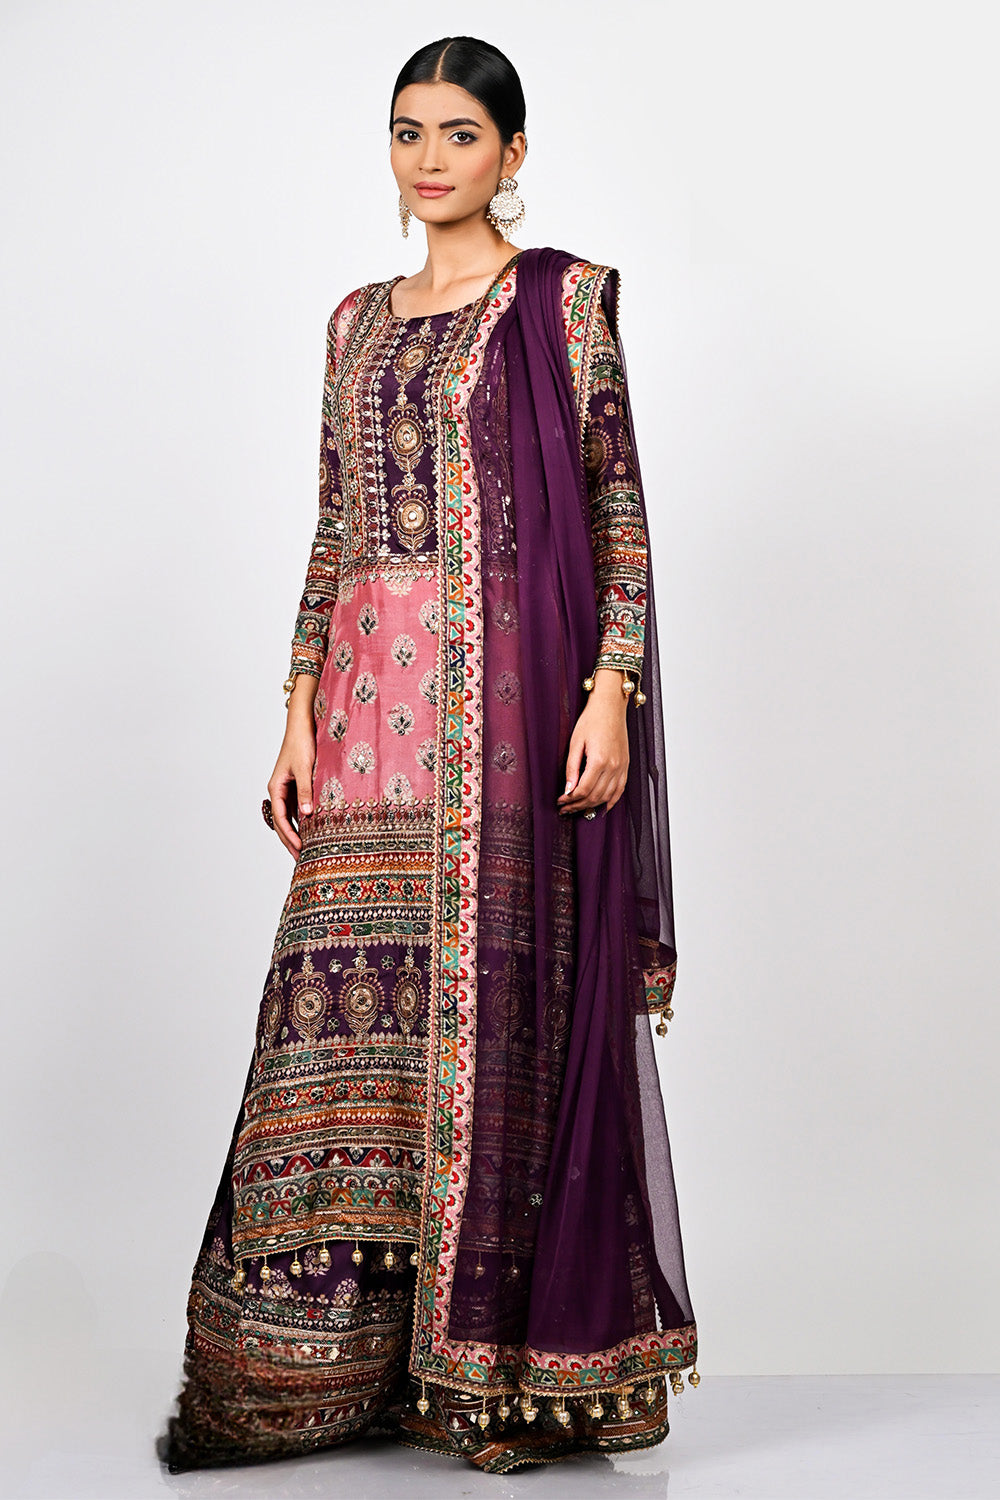 Peach & Purple Color Embroidered Crepe Suit With Palazzo